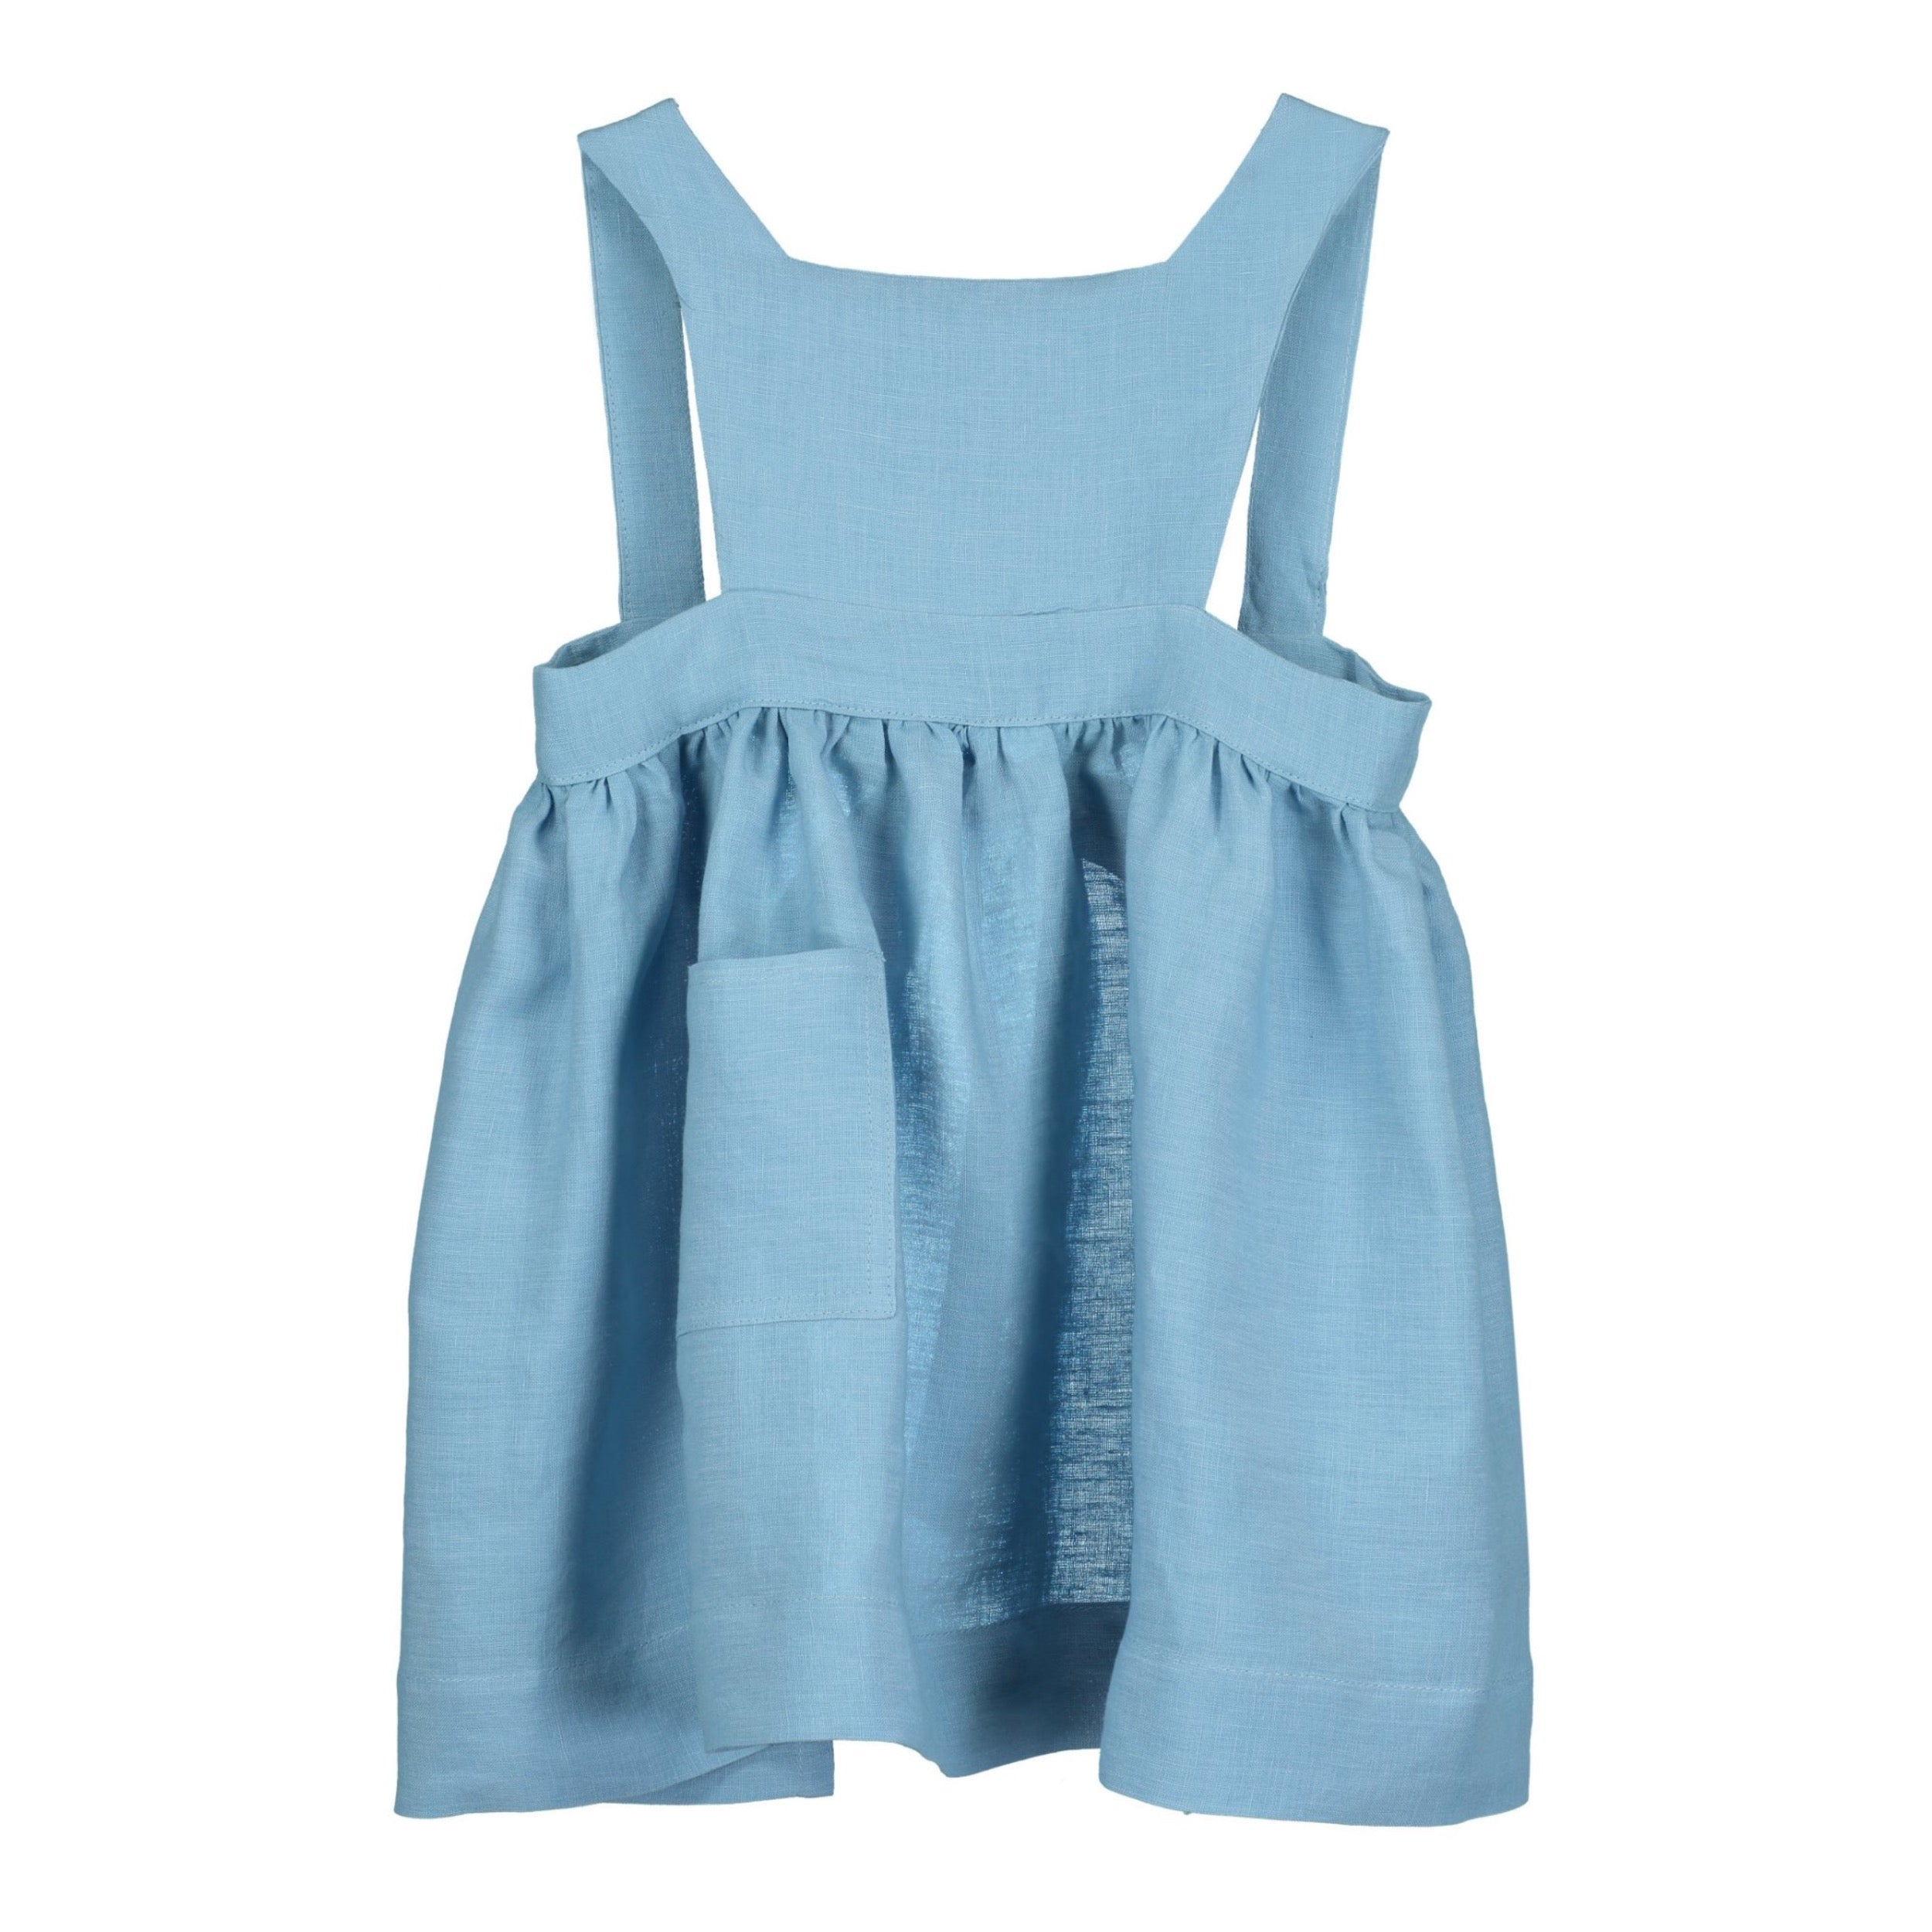 Carrier Company Child's Pinafore in Sky Linen